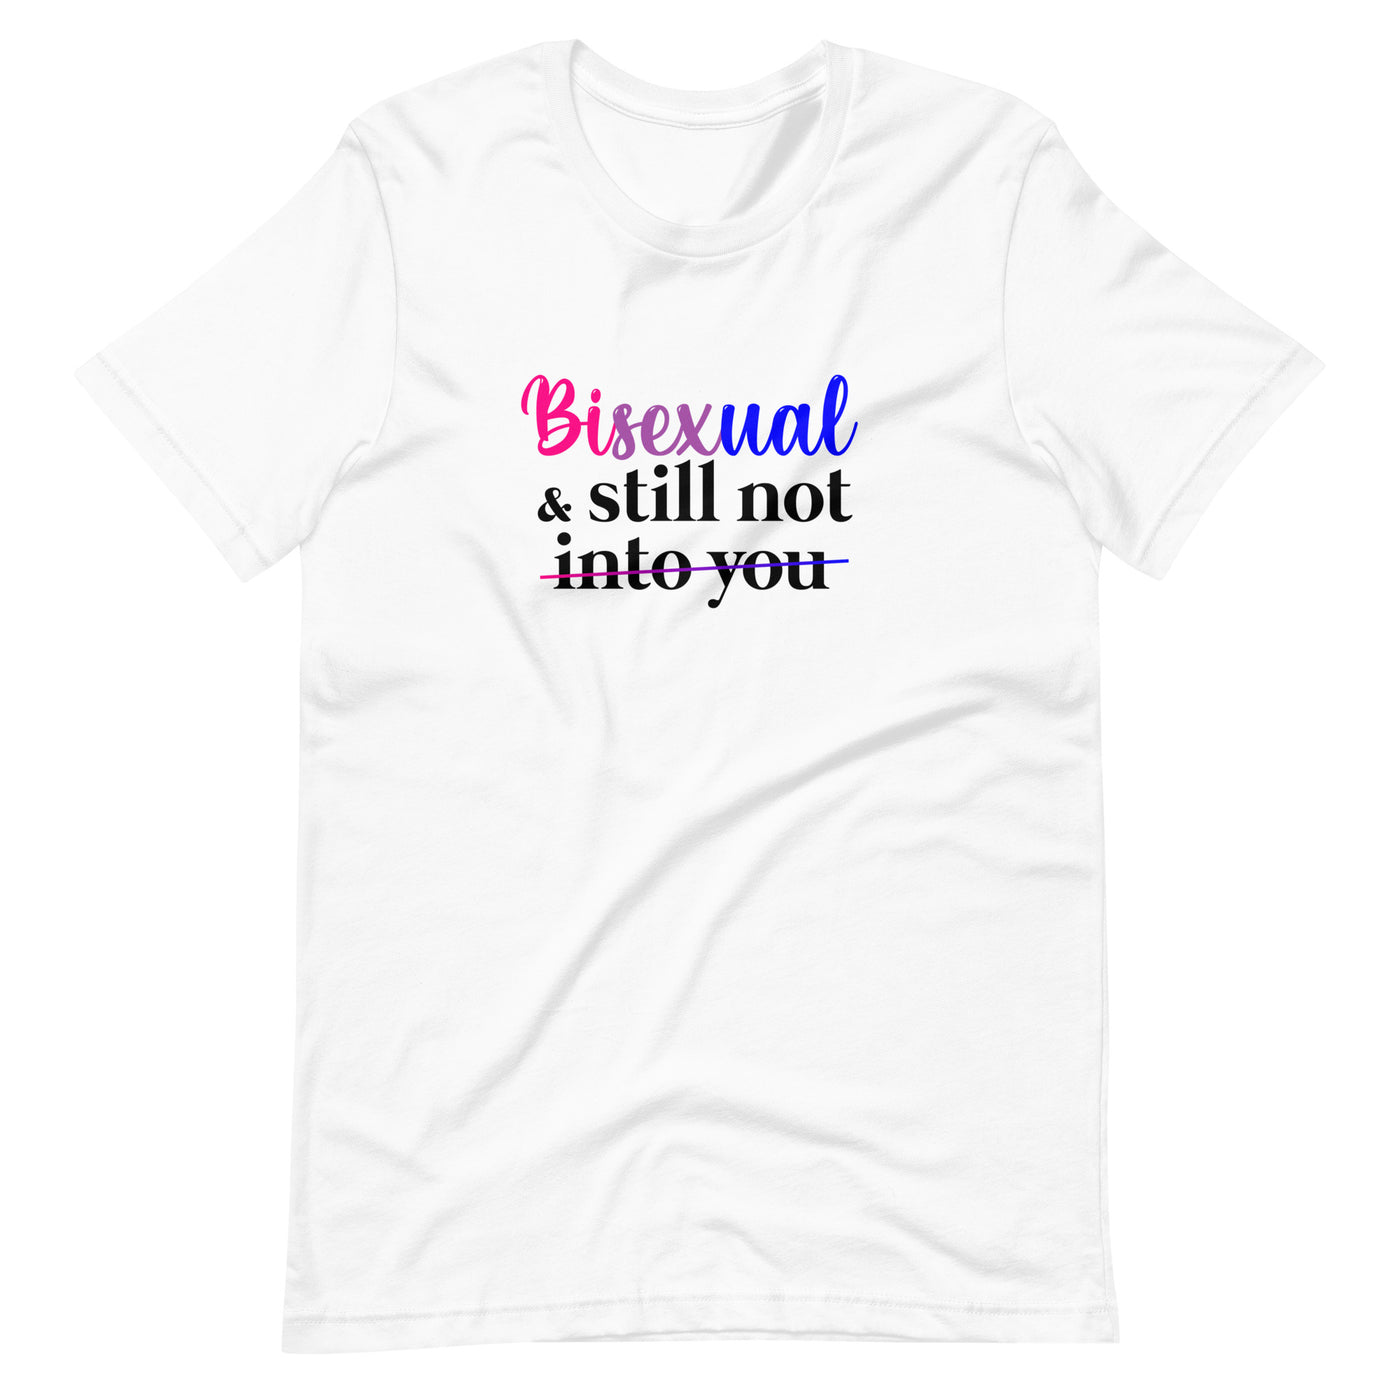 Pride Clothes - Not-So-Gentle Bisexual & Still Not into You TShirt - White